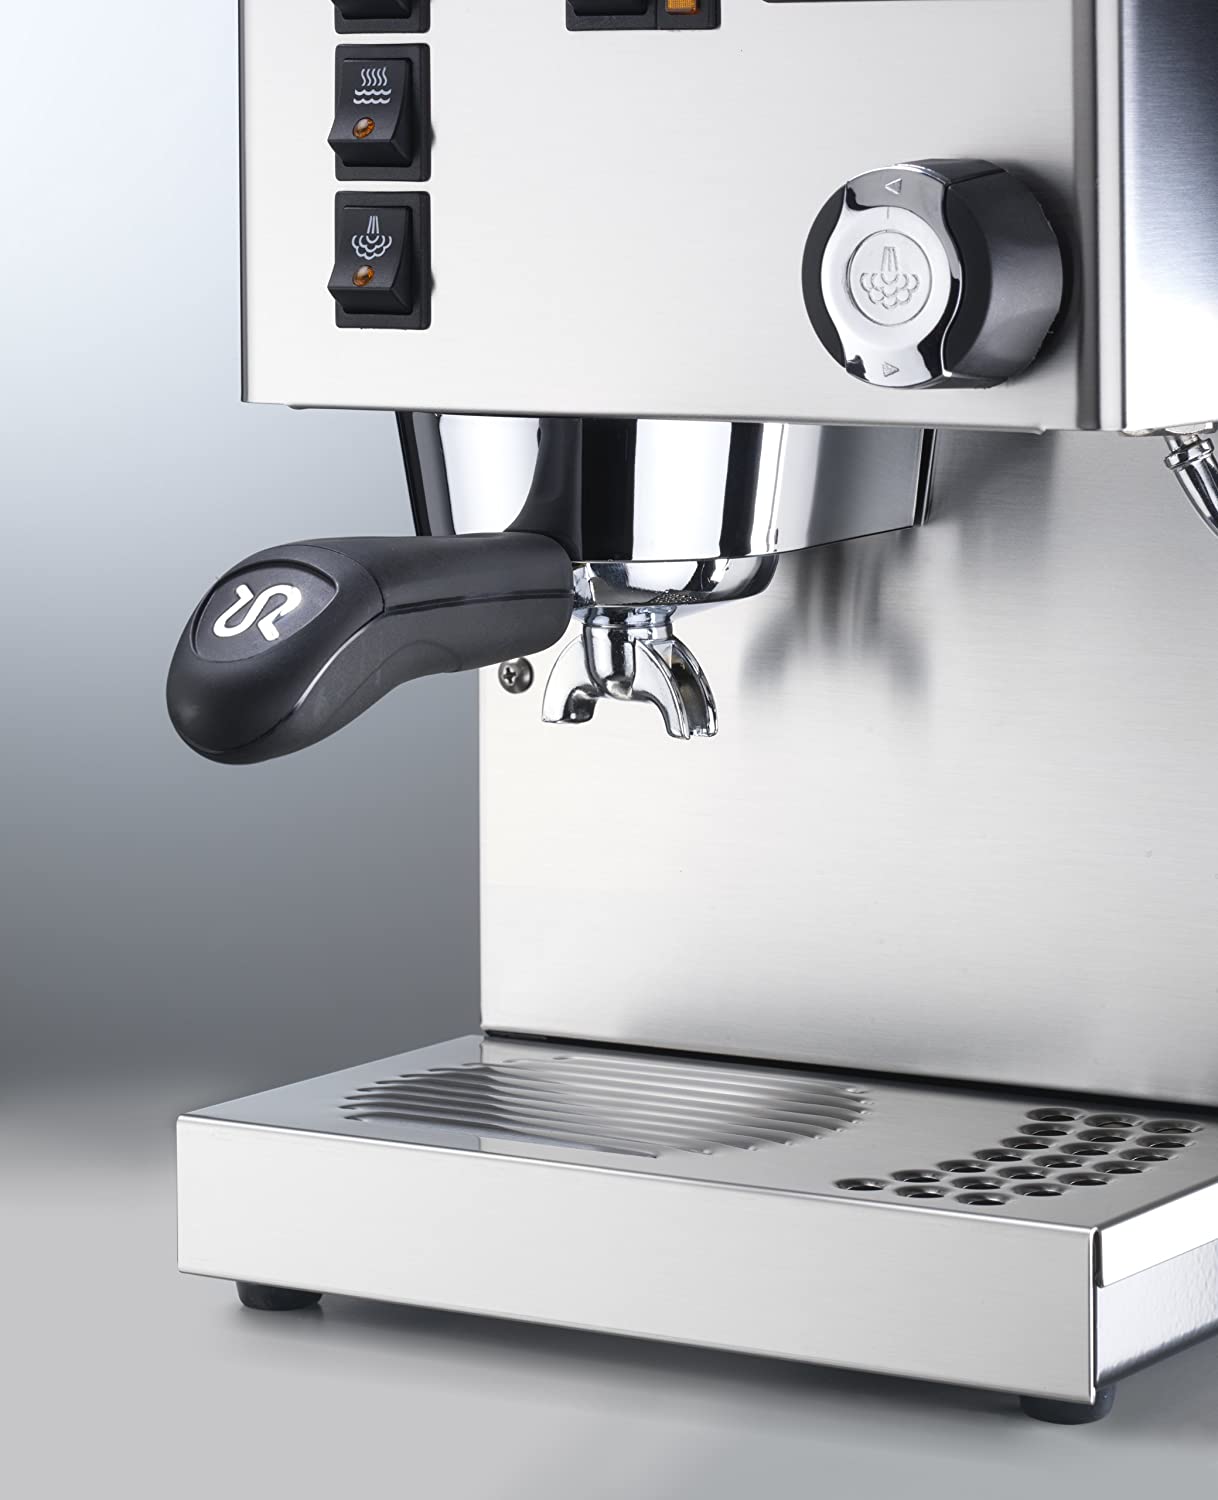 Espresso Machine with Iron Frame and Stainless Steel Side Panels